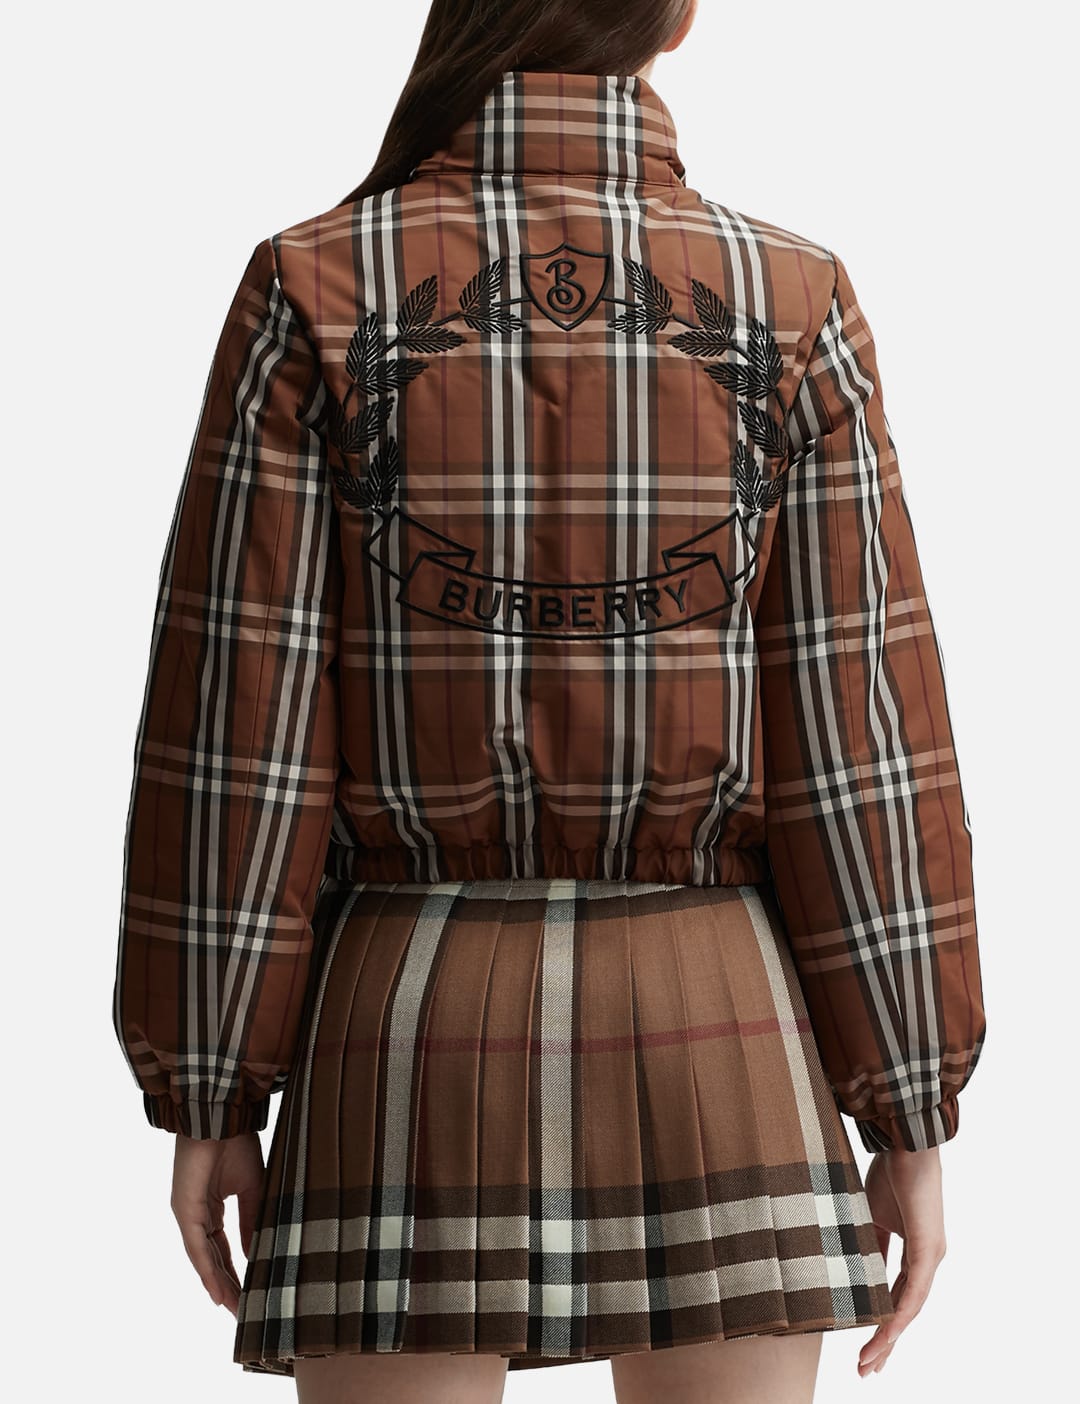 Burberry - Check Nylon Puffer Jacket | HBX - Globally Curated